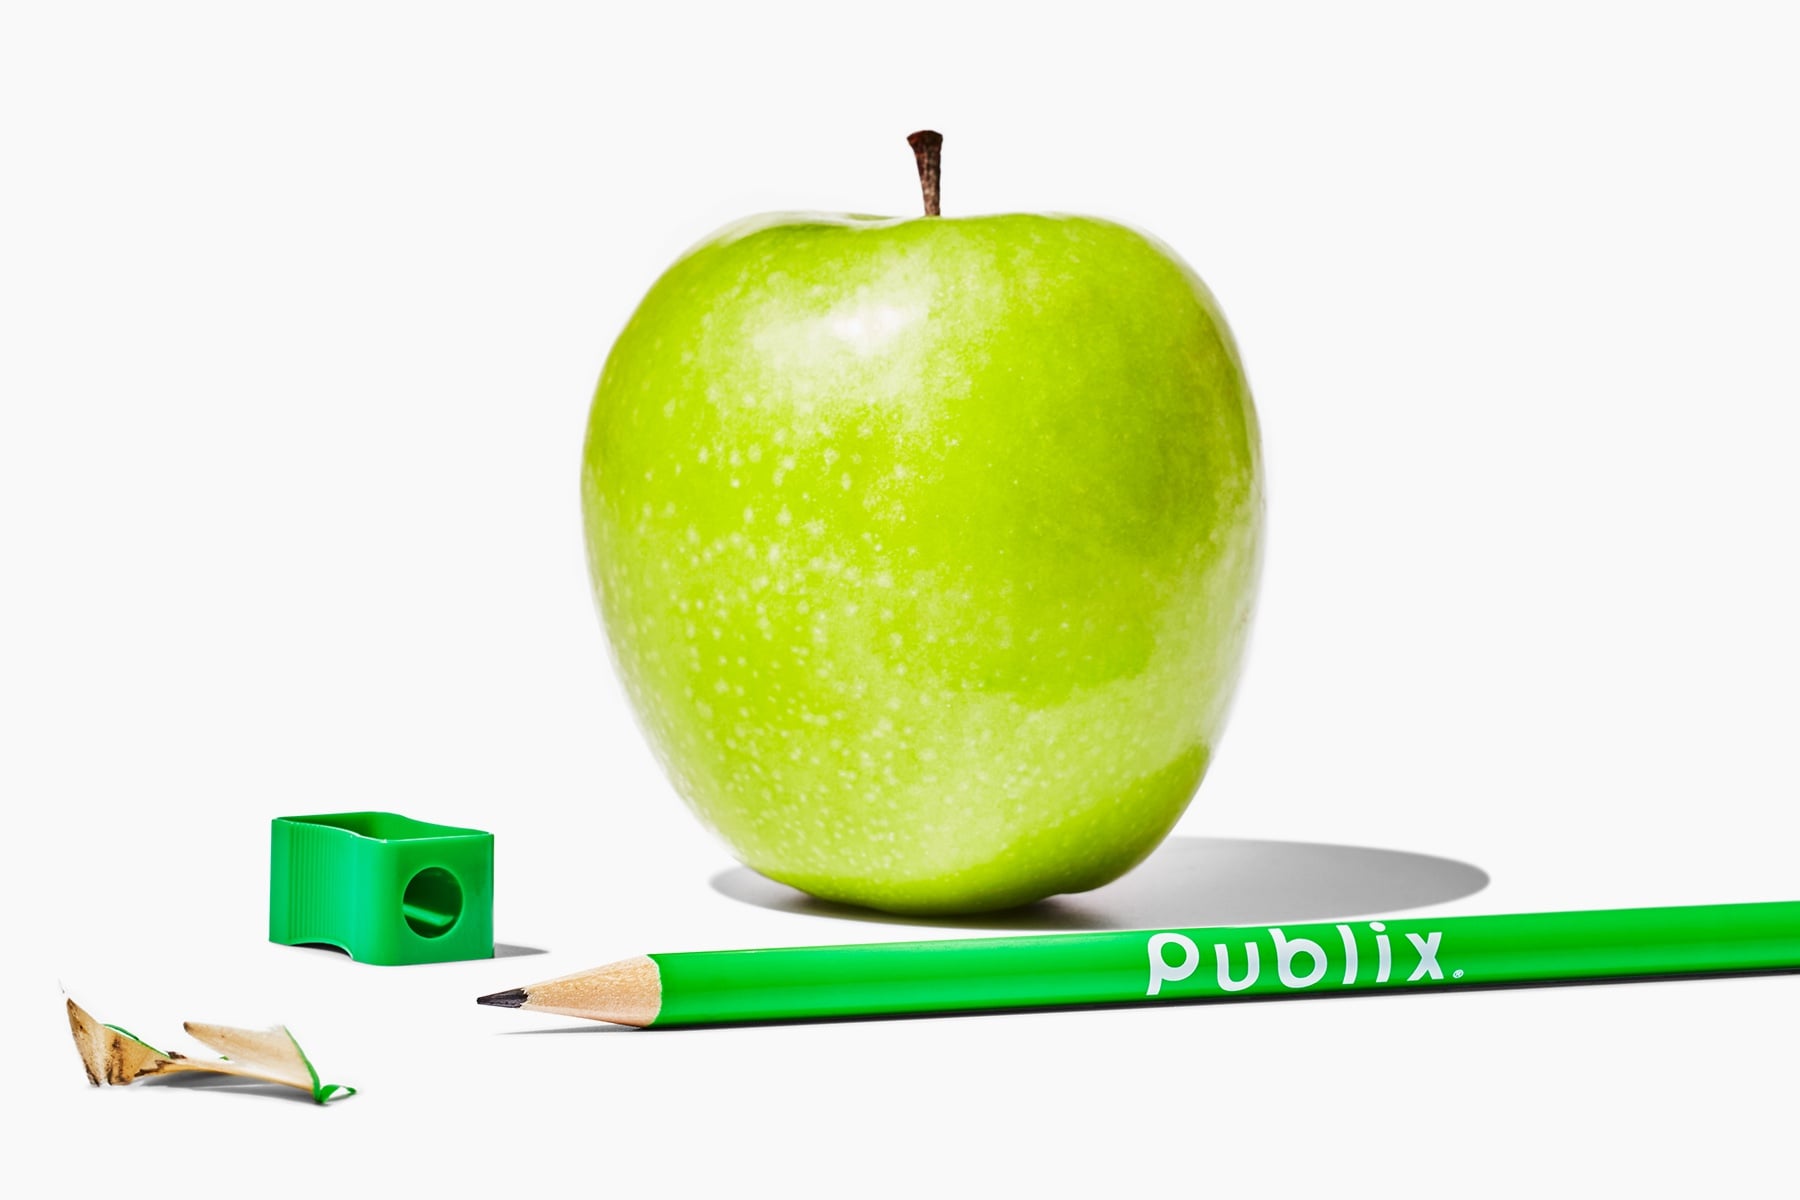 Public partners - apple and pencil